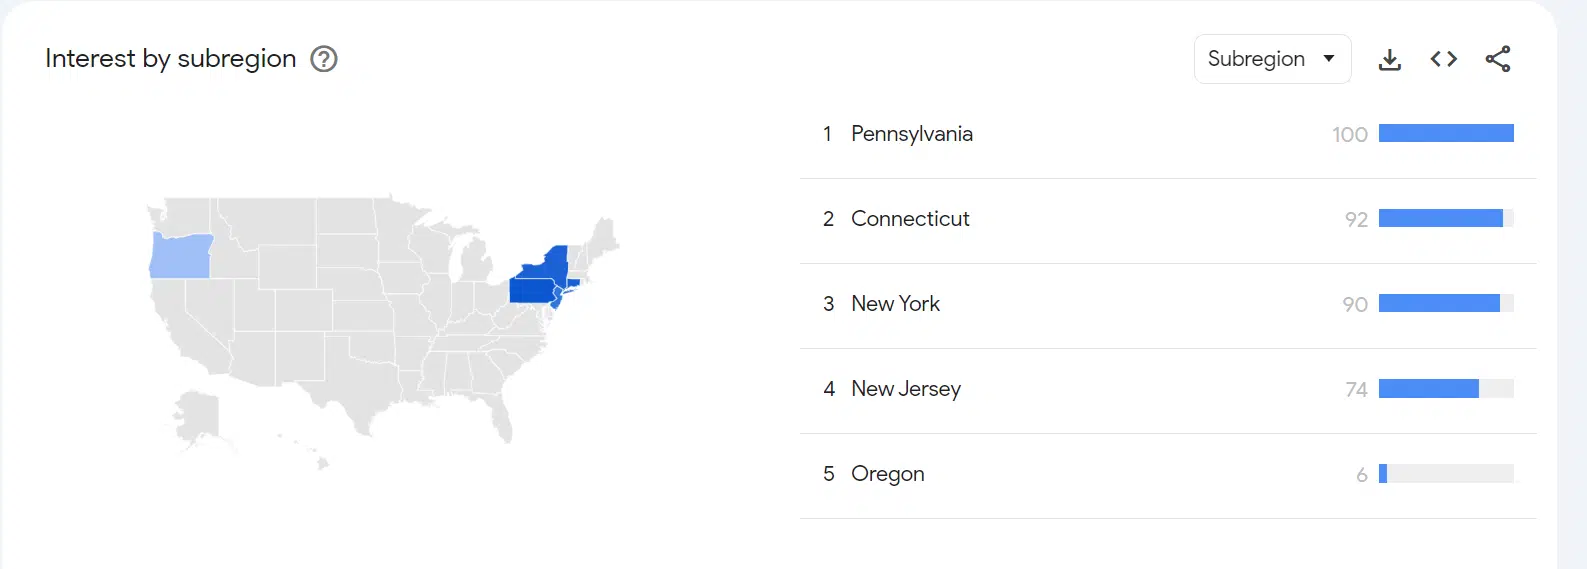 Google Trends - interest by subregion